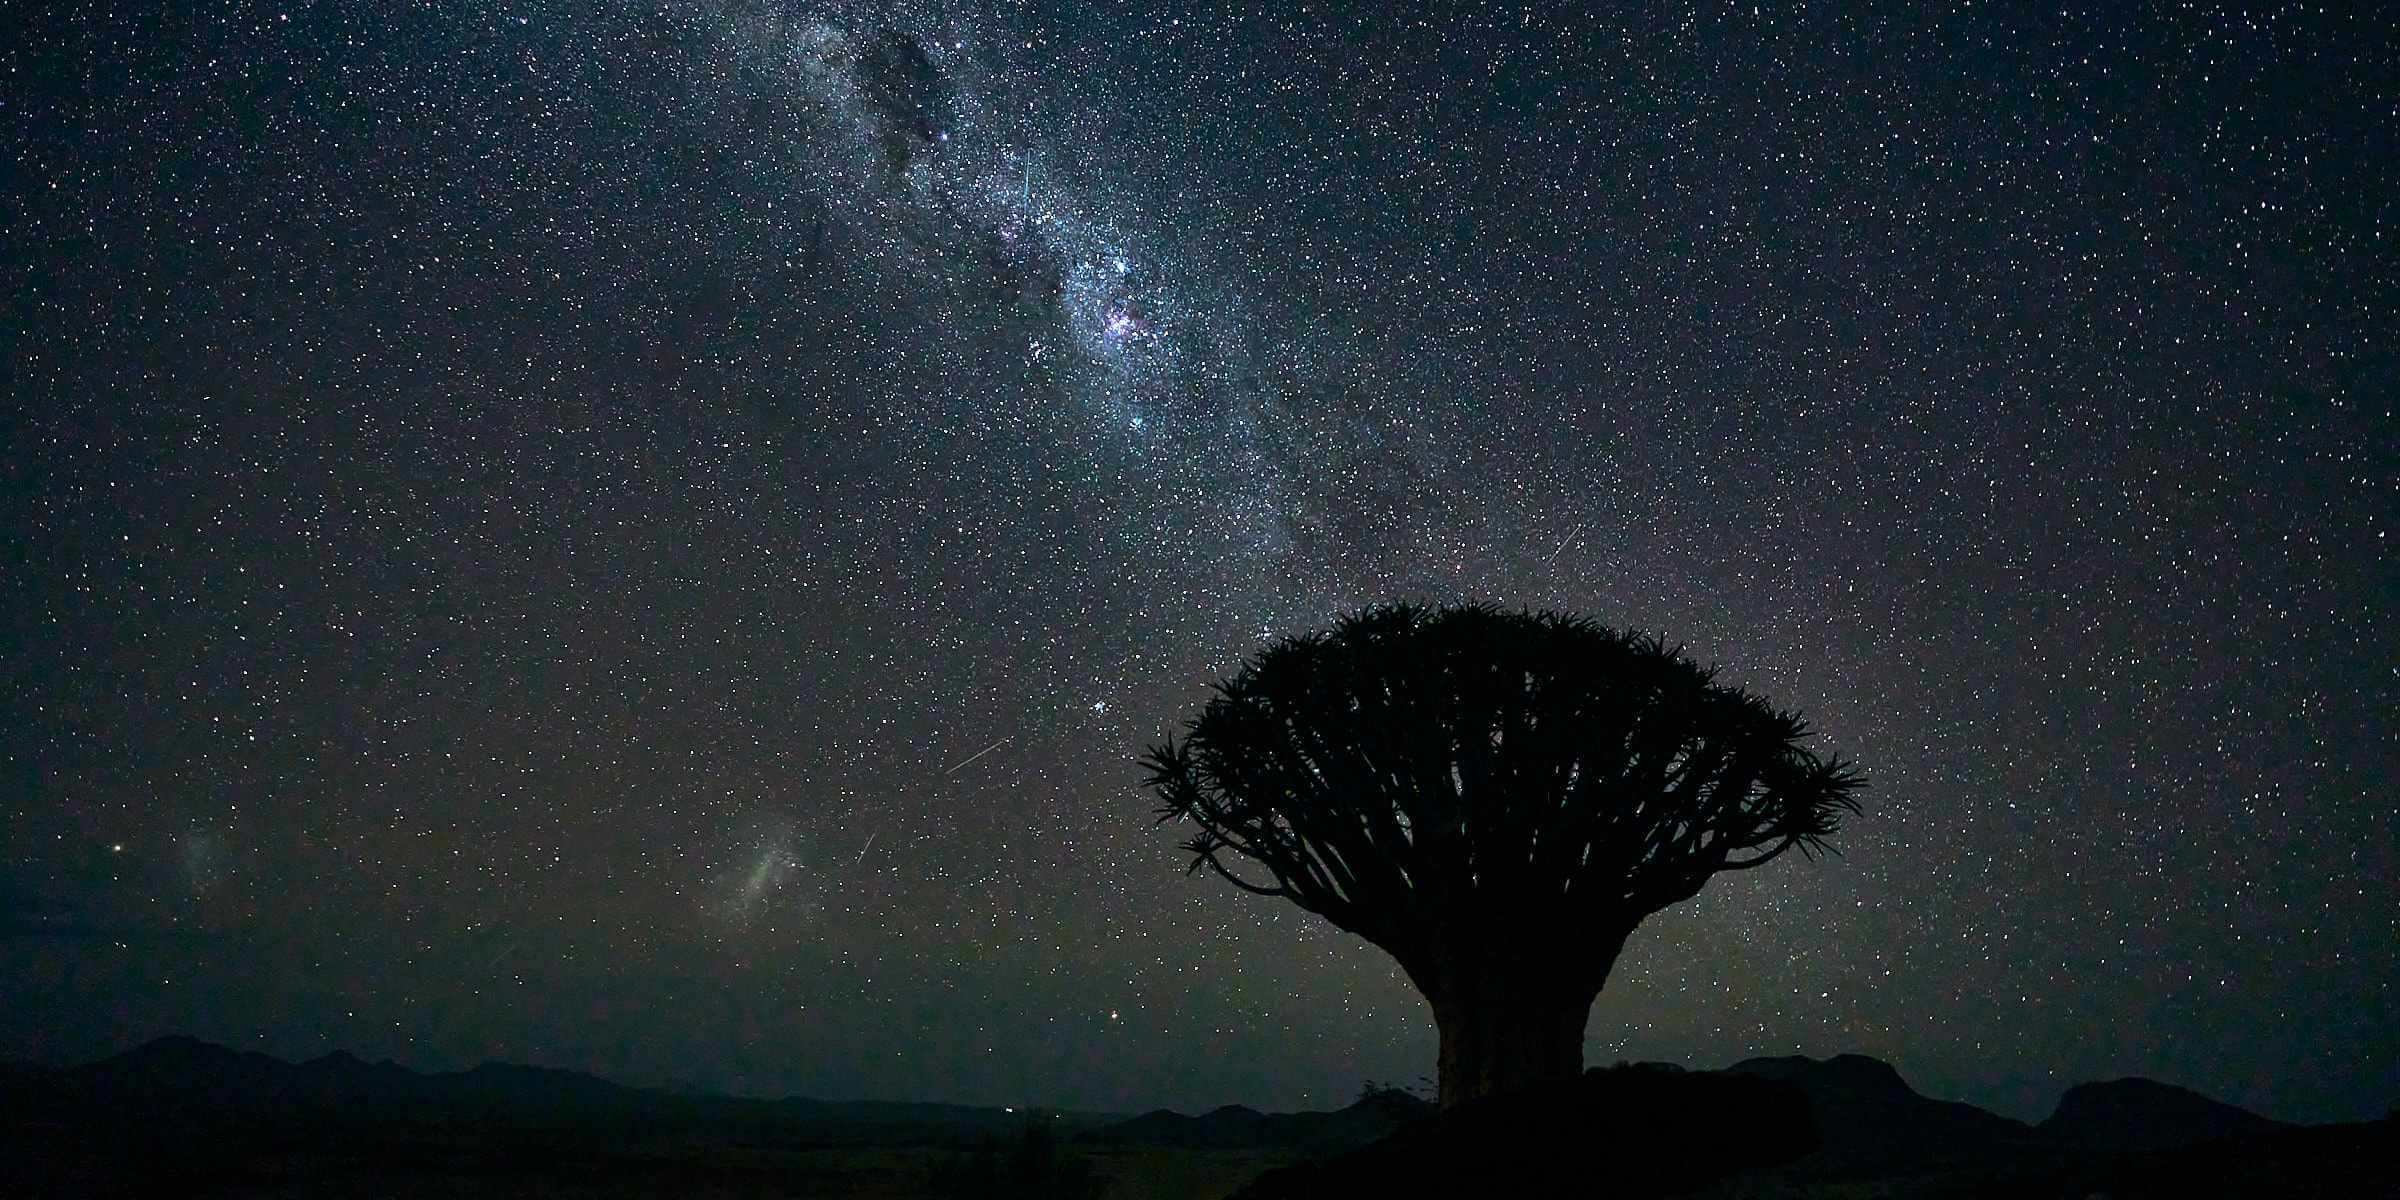 A quiver tree silhouetted against the Milkway.